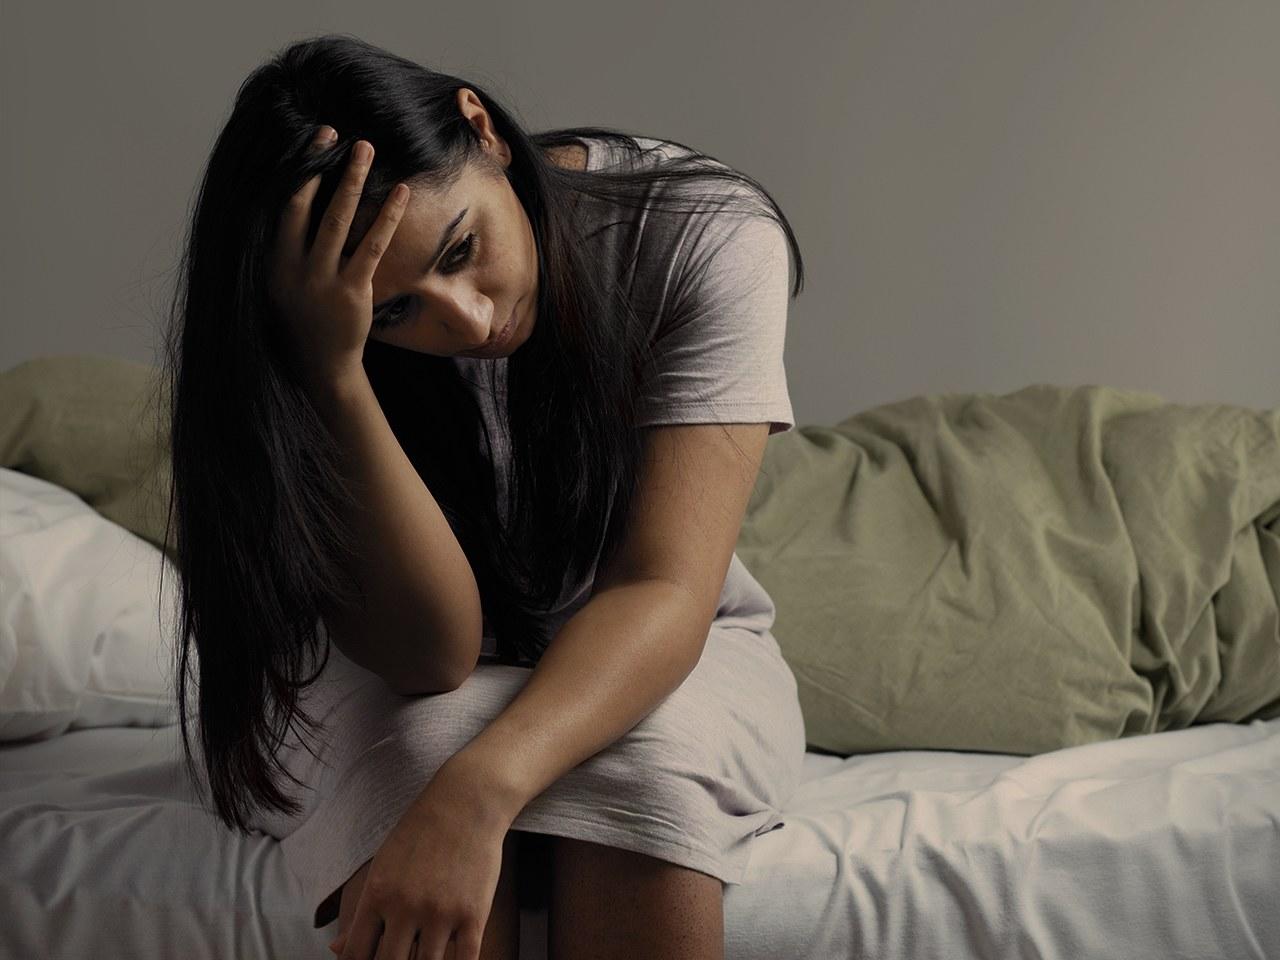 Nocturnal Panic Attacks: What Causes Them?